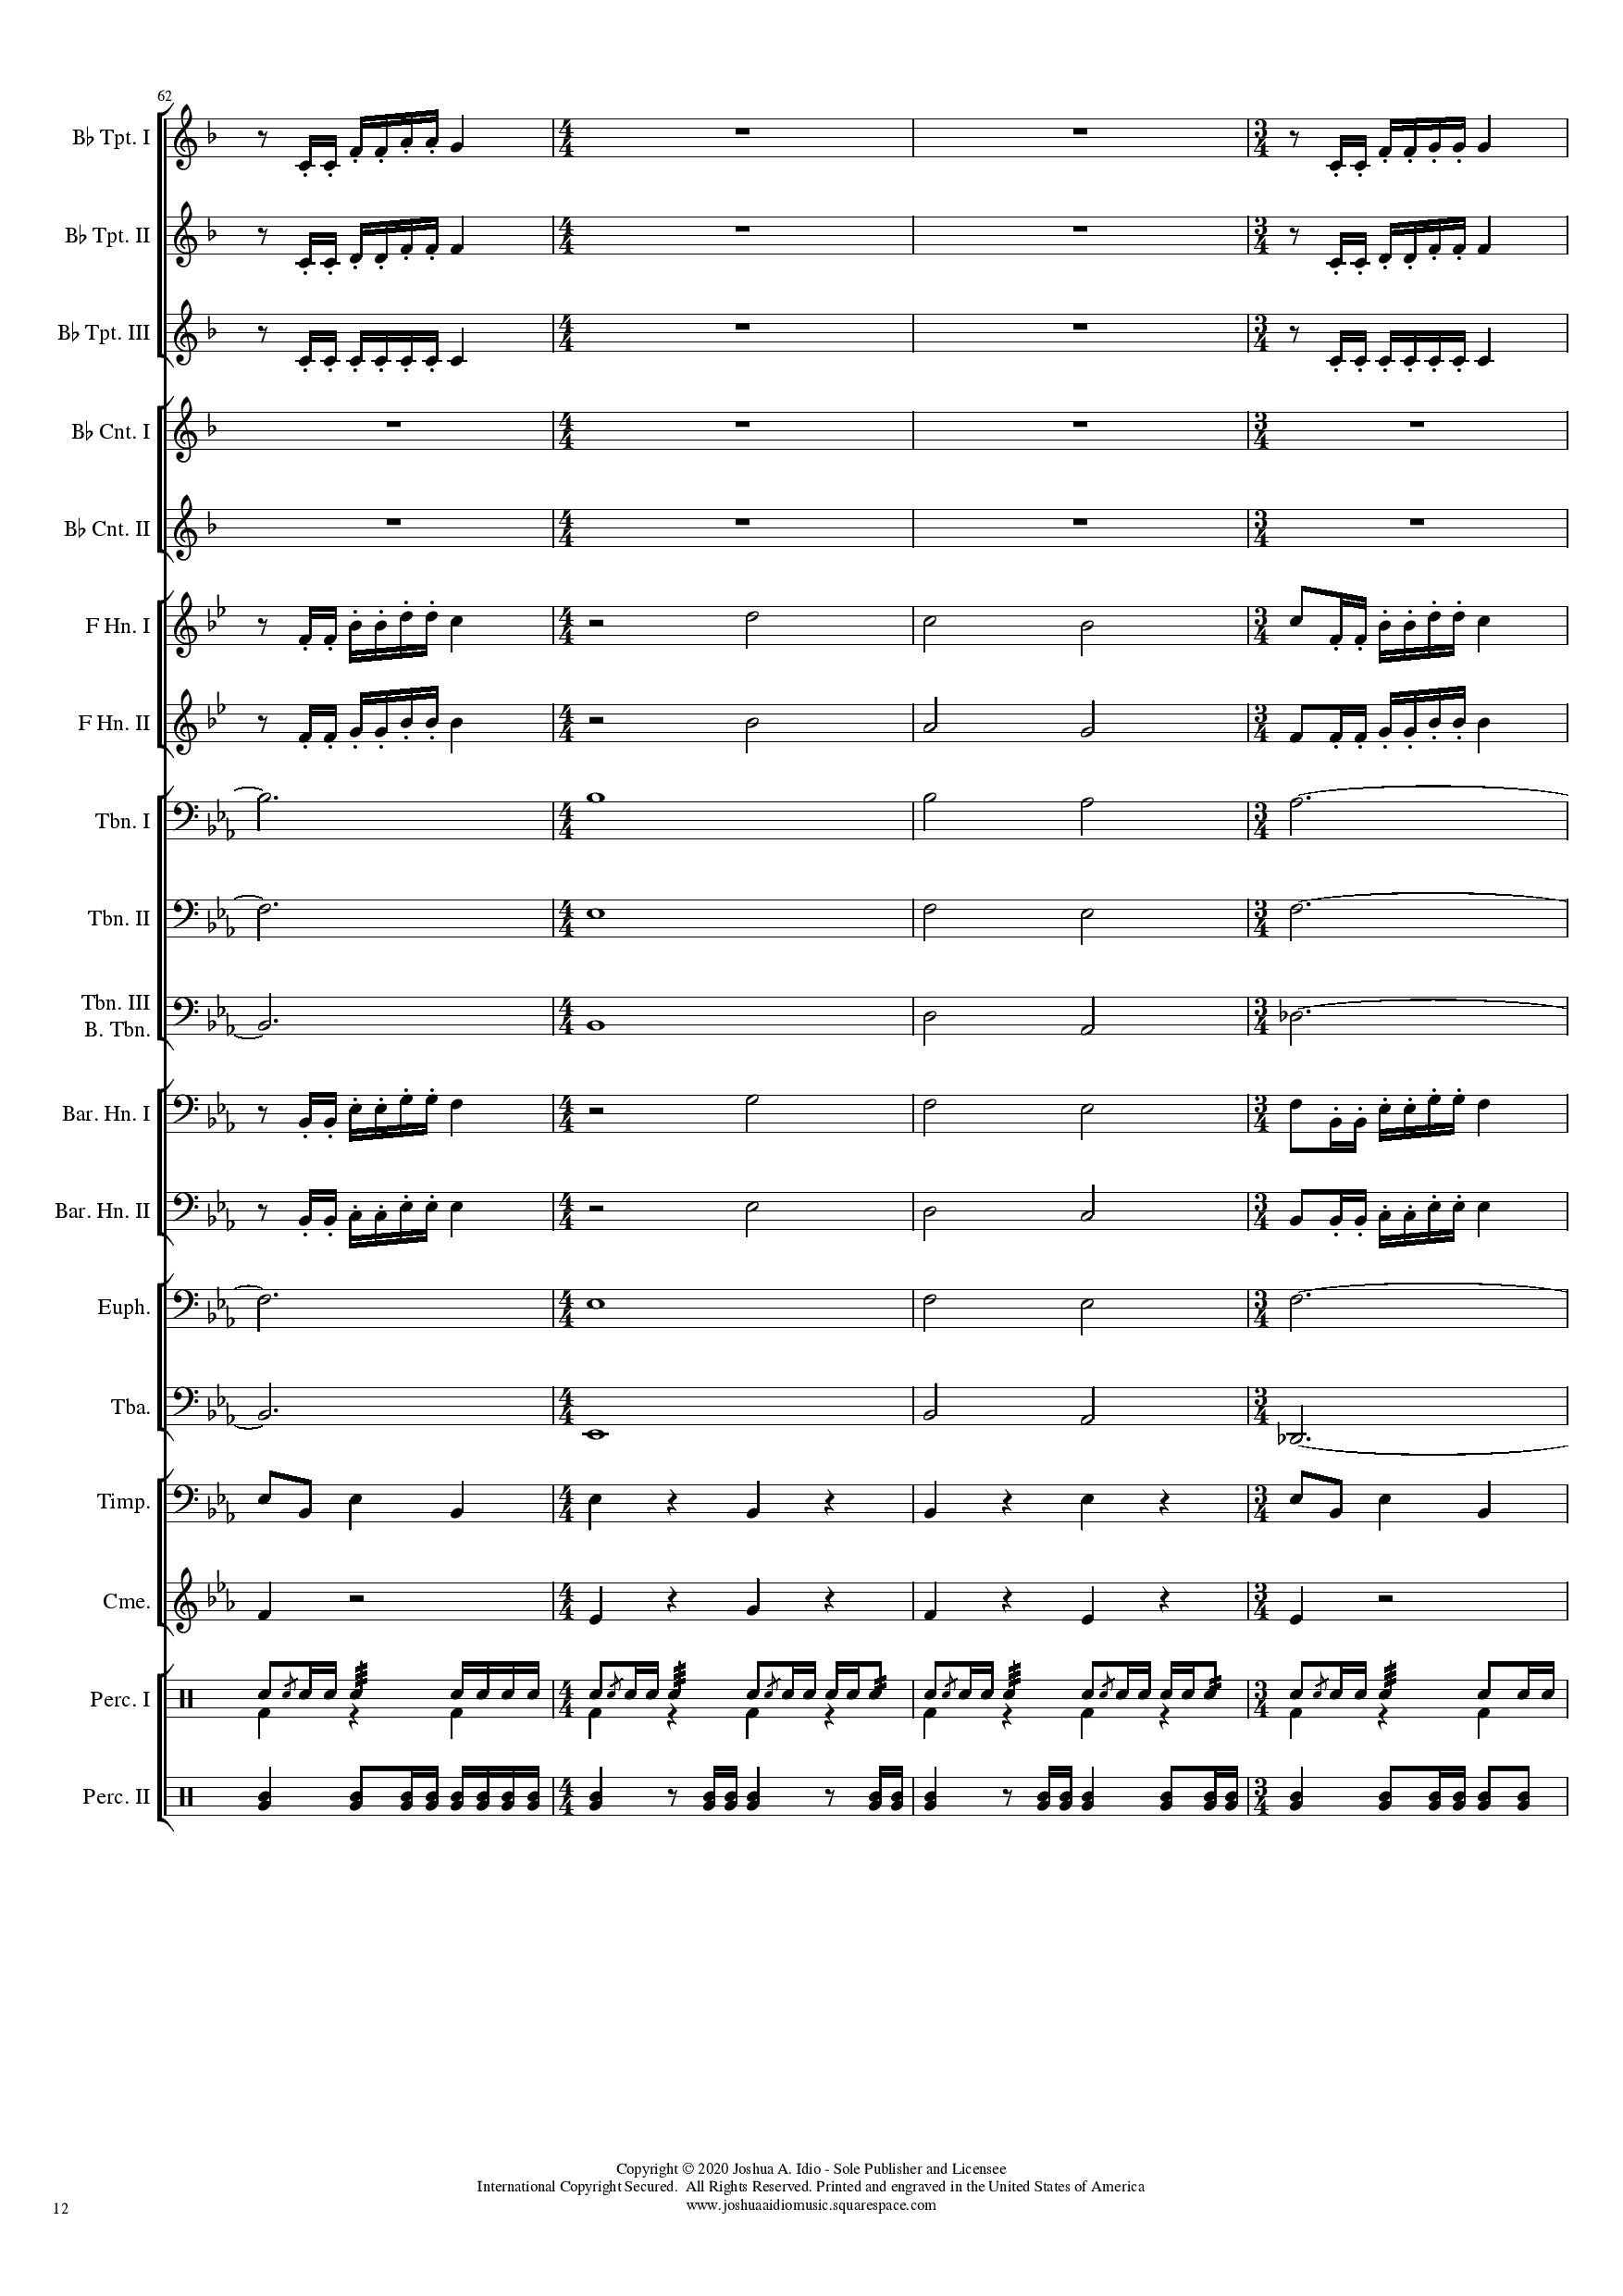 The Procession of Scholars - Conductor s Score-page-012.jpg